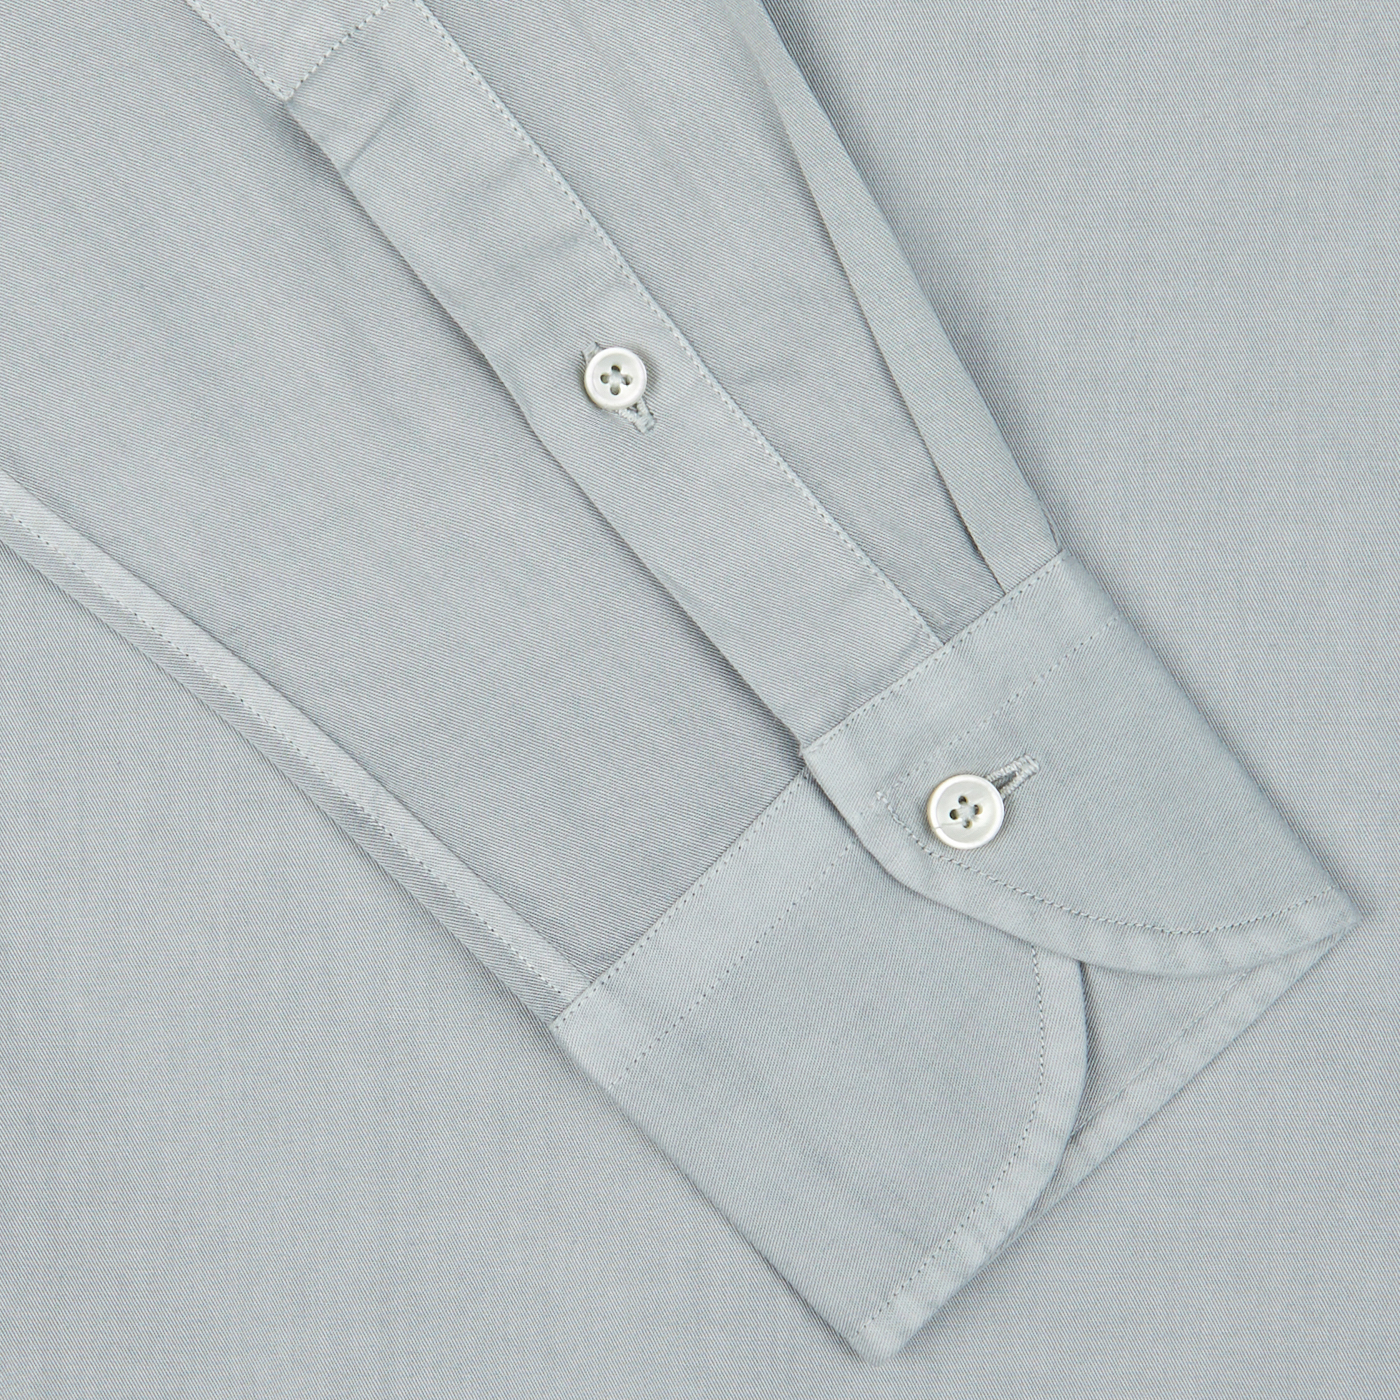 Close-up of a Sage Green Cotton Twill Tailor Fit Shirt cuff with buttons by Xacus.